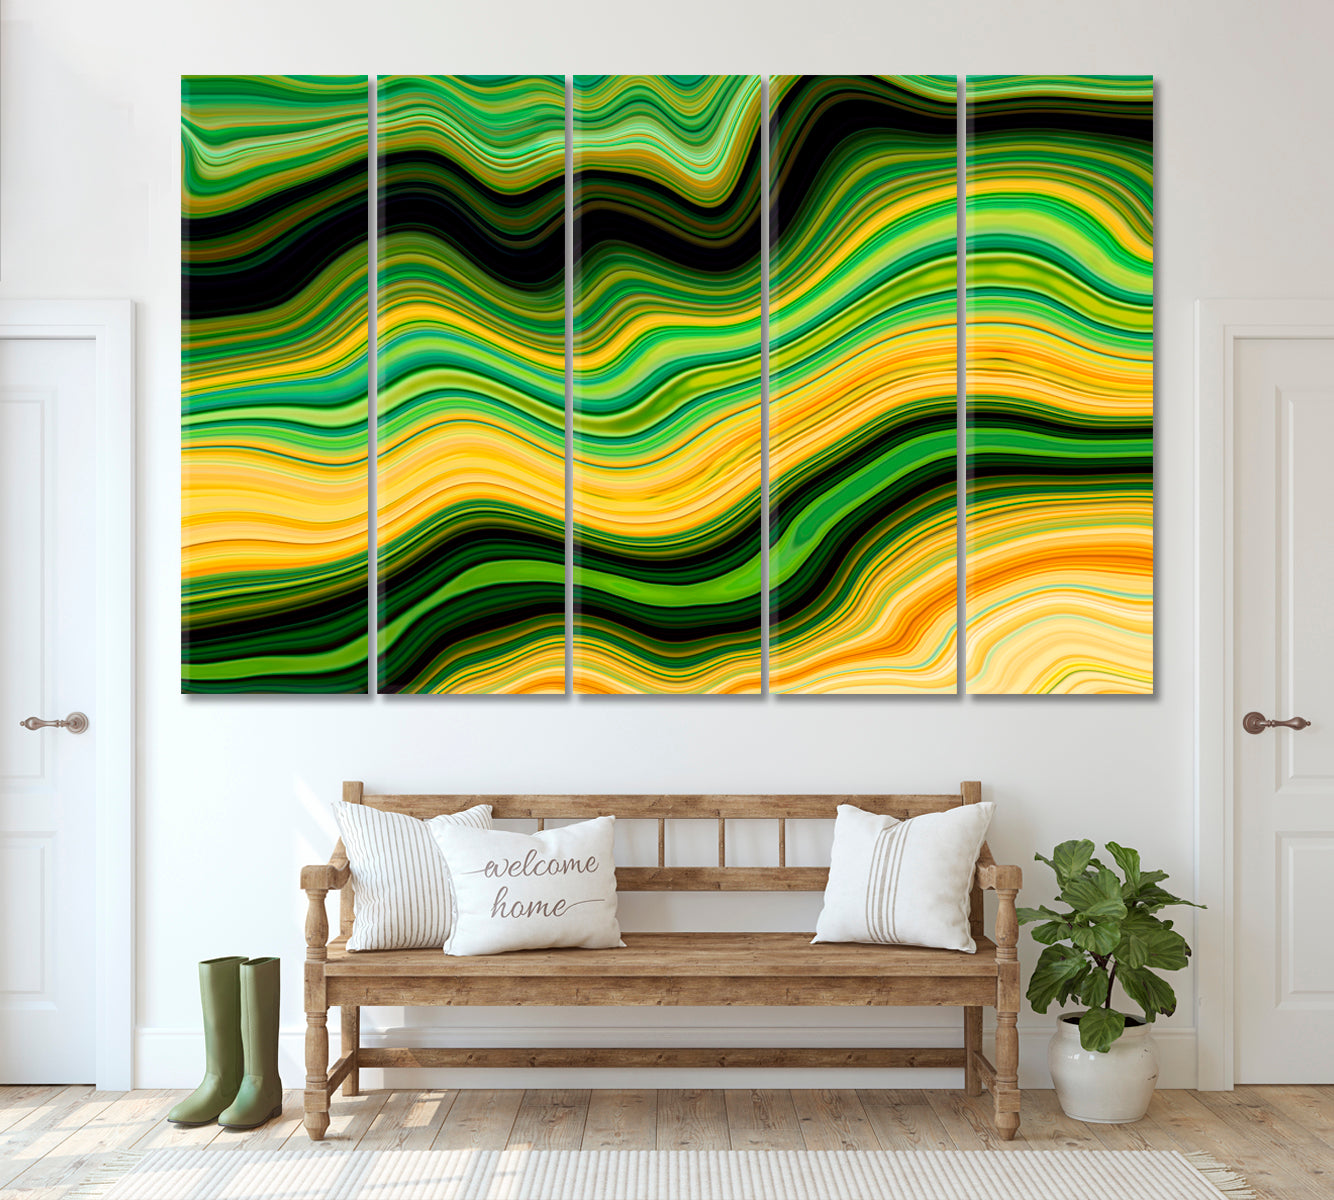 Green Marble Pattern Canvas Print ArtLexy 5 Panels 36"x24" inches 